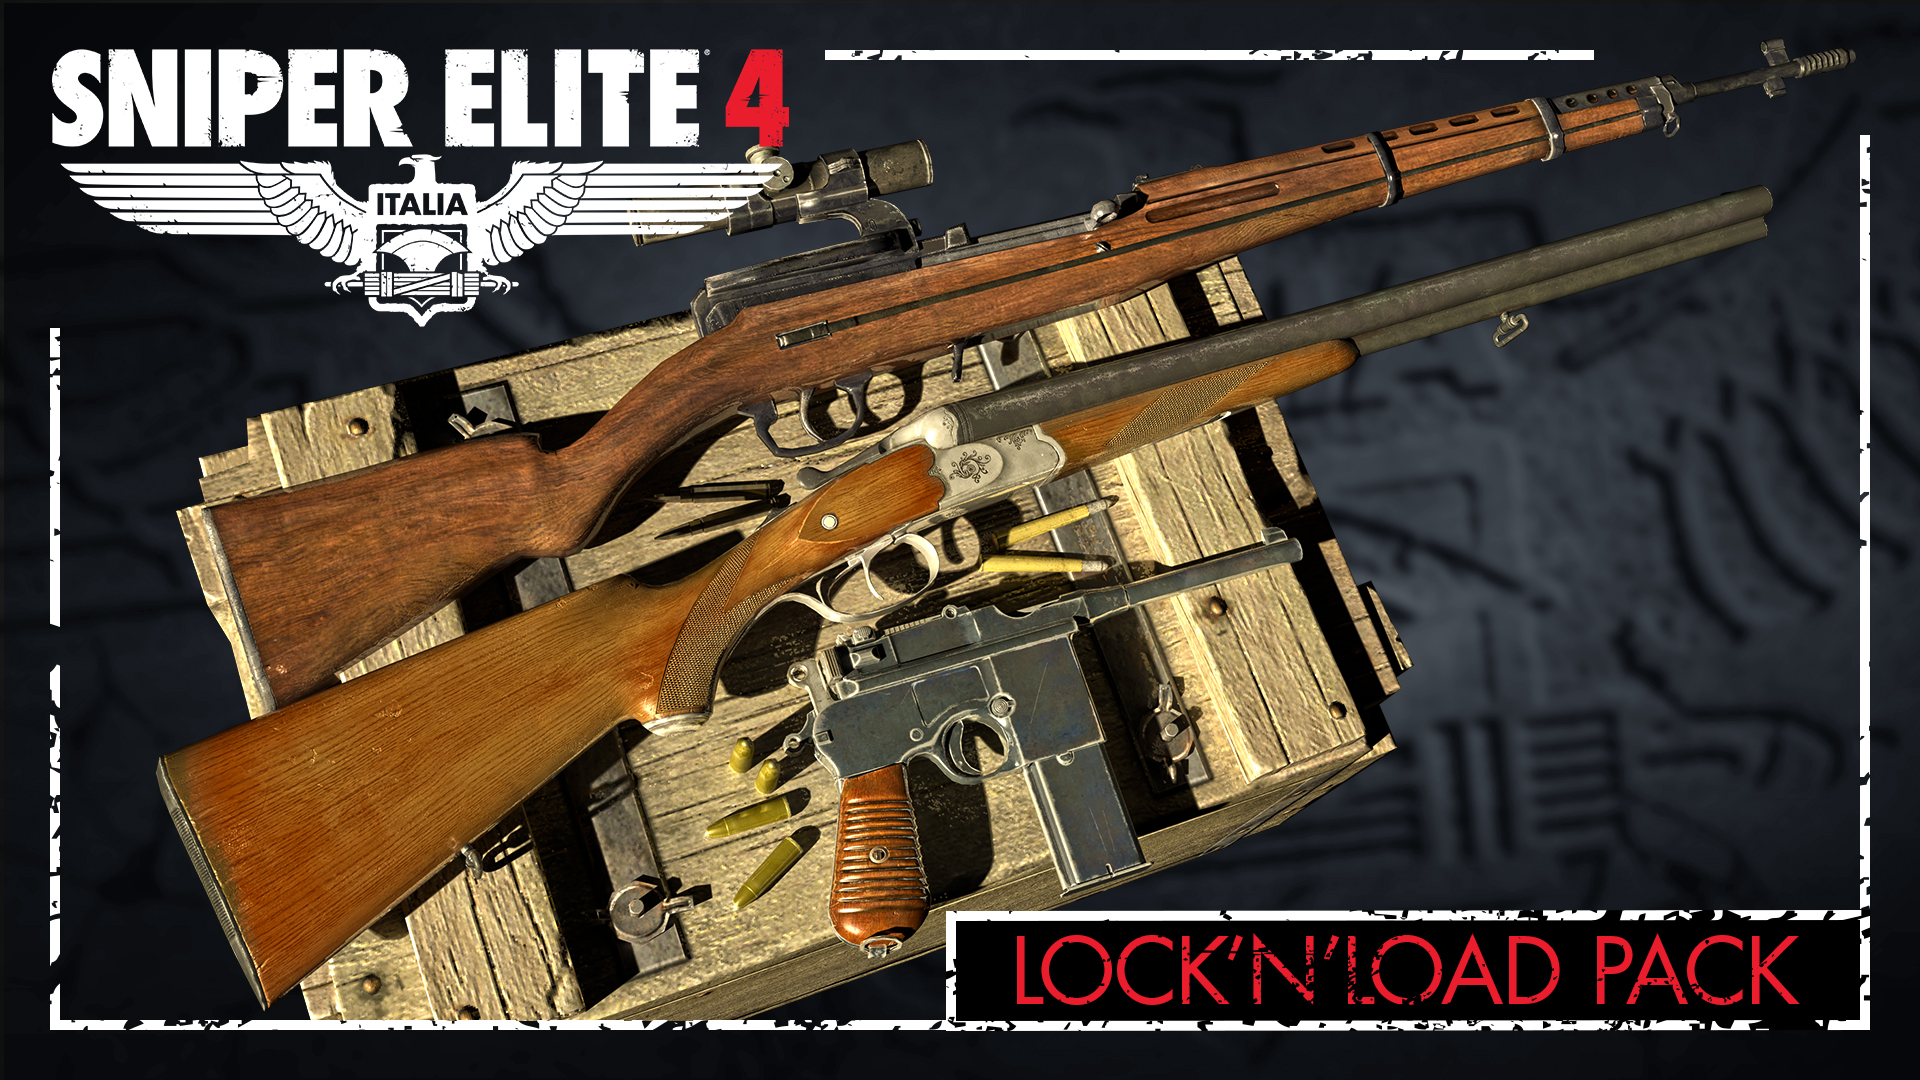 Sniper Elite 4 - Lock and Load Weapons Pack DLC Steam CD Key $4.51